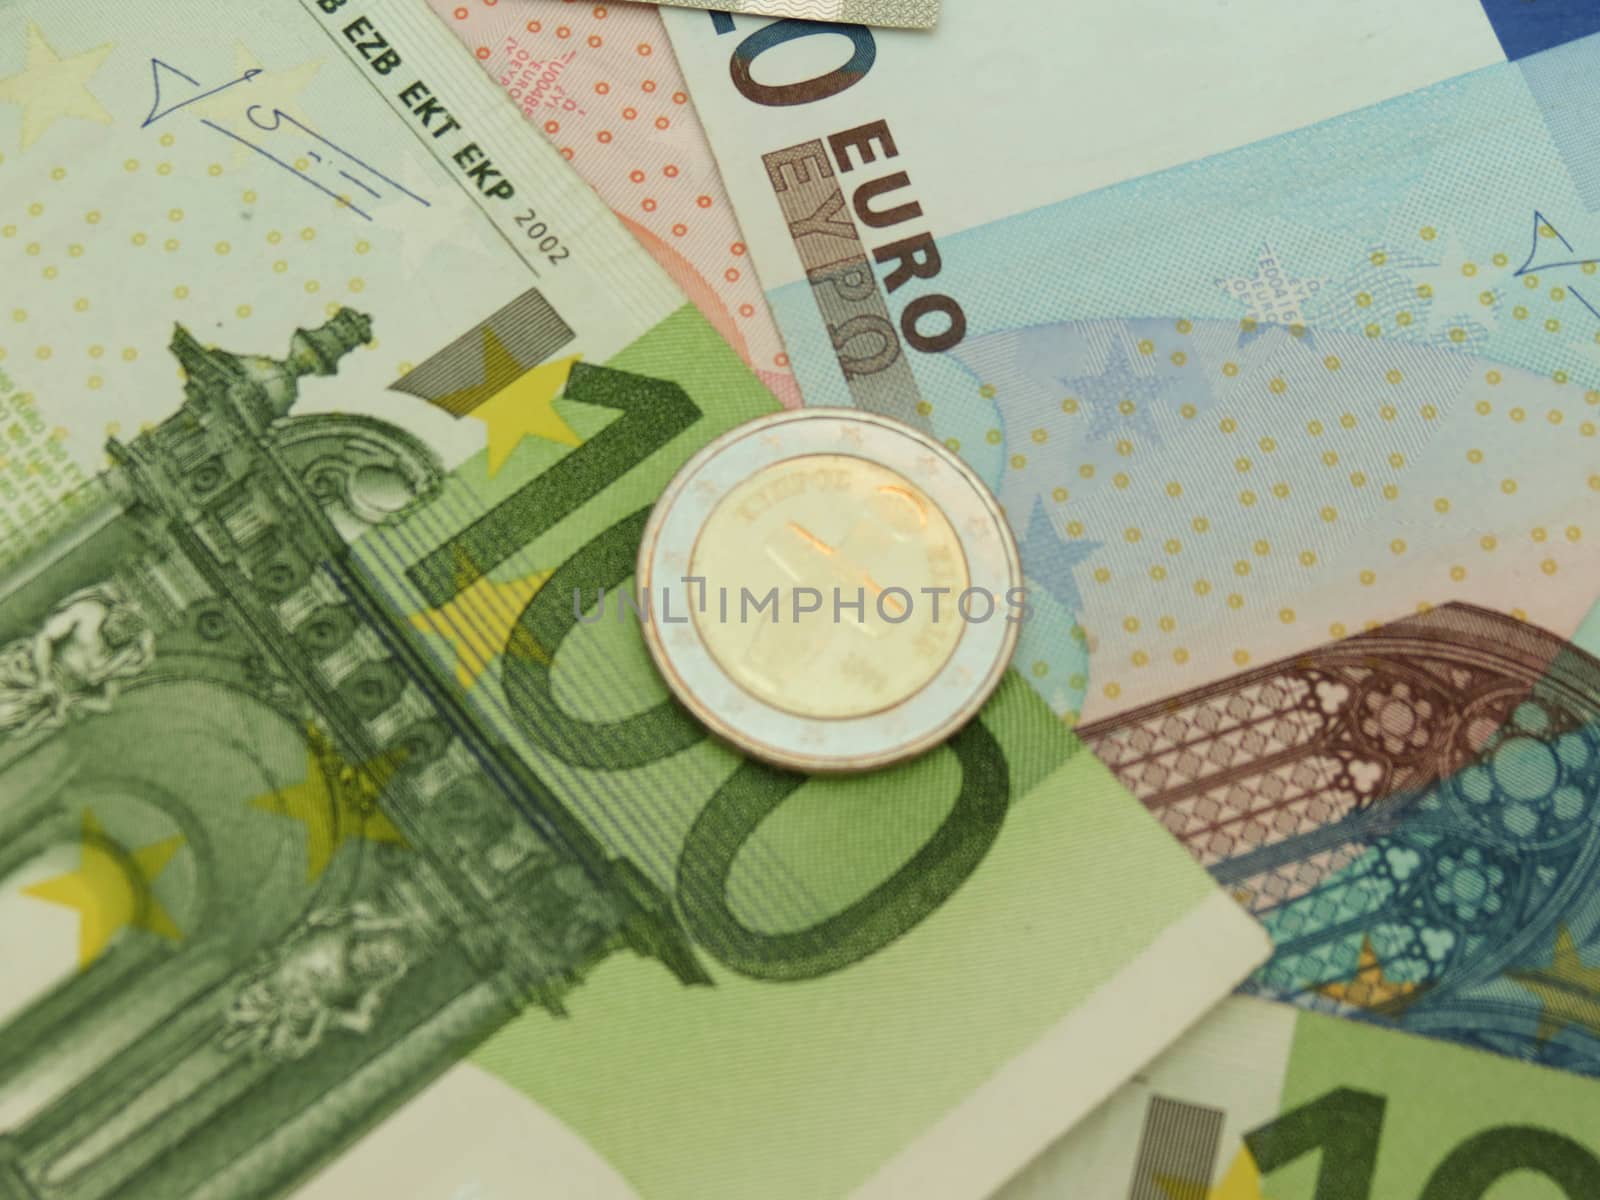 Euro (EUR) banknotes and coins from Cyprus